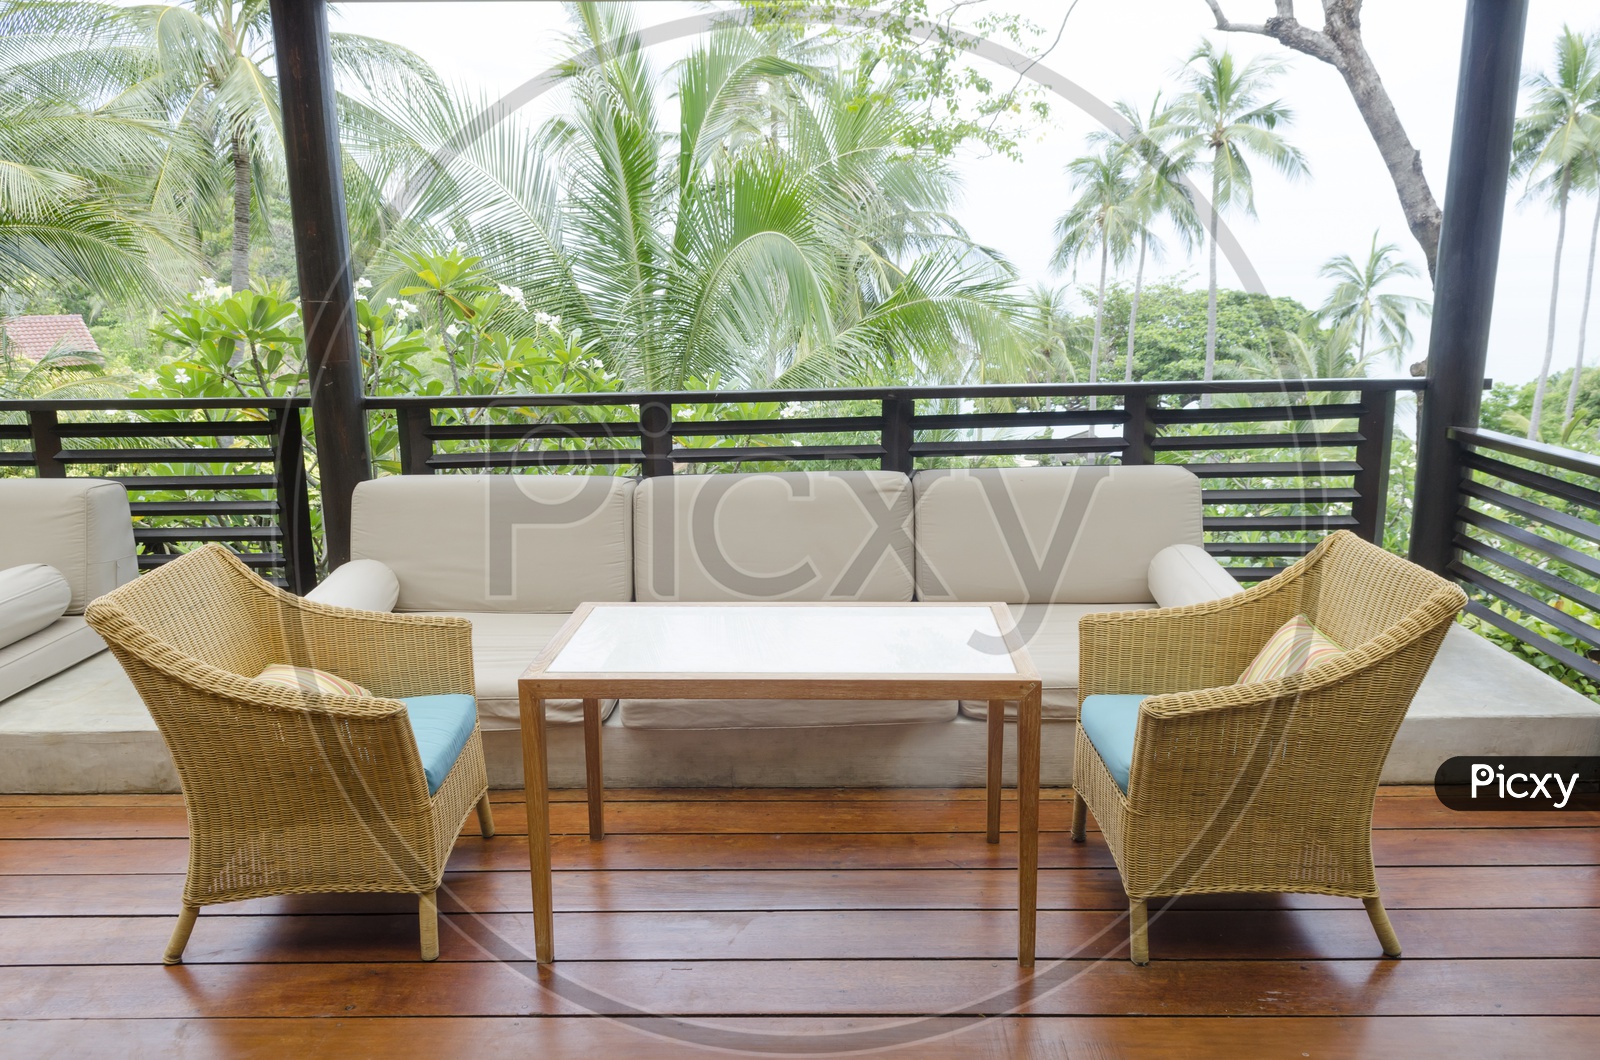 Vintage chairs and sofa set in a Thai Resort